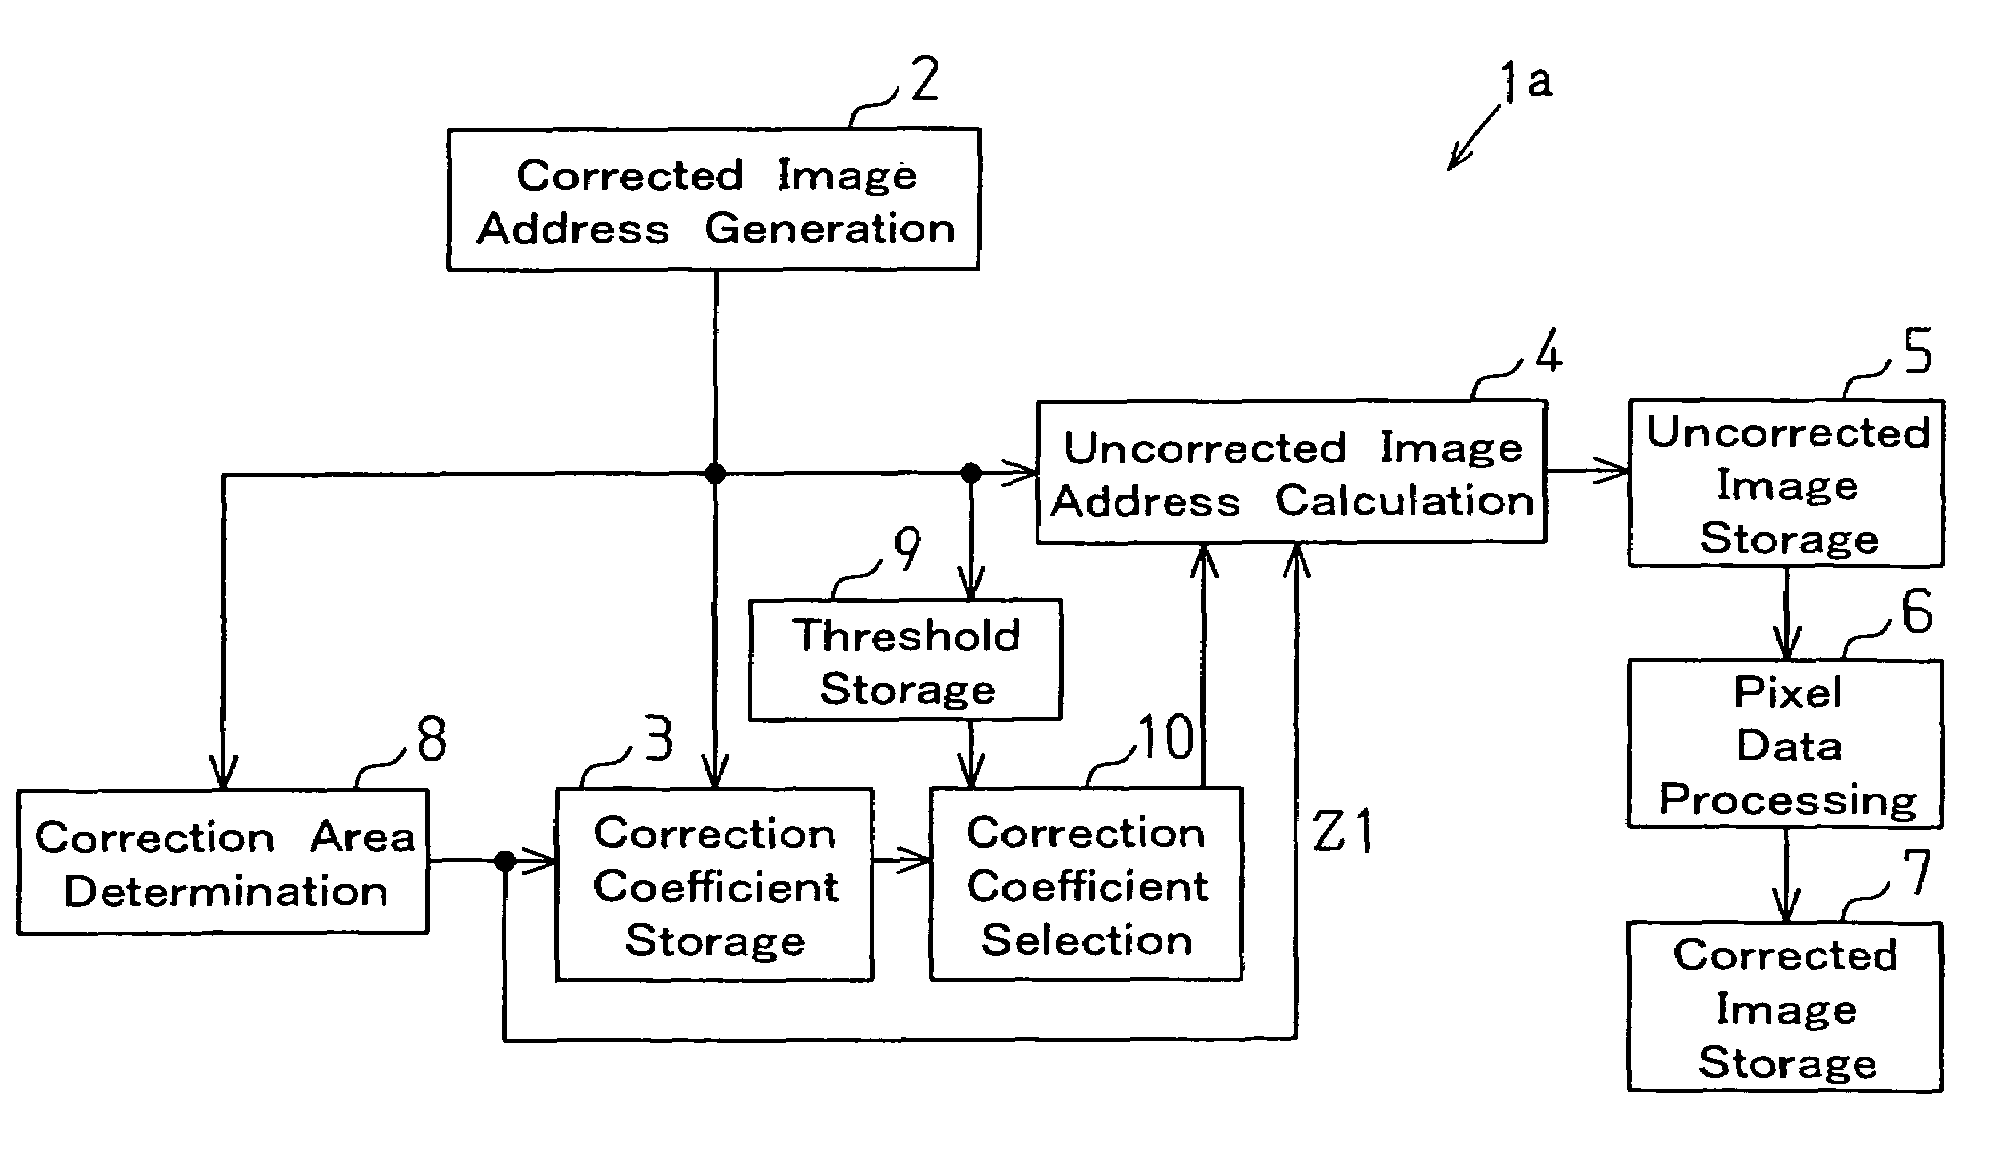 Distortion correction circuit for generating distortion-corrected image using data for uncorrected image